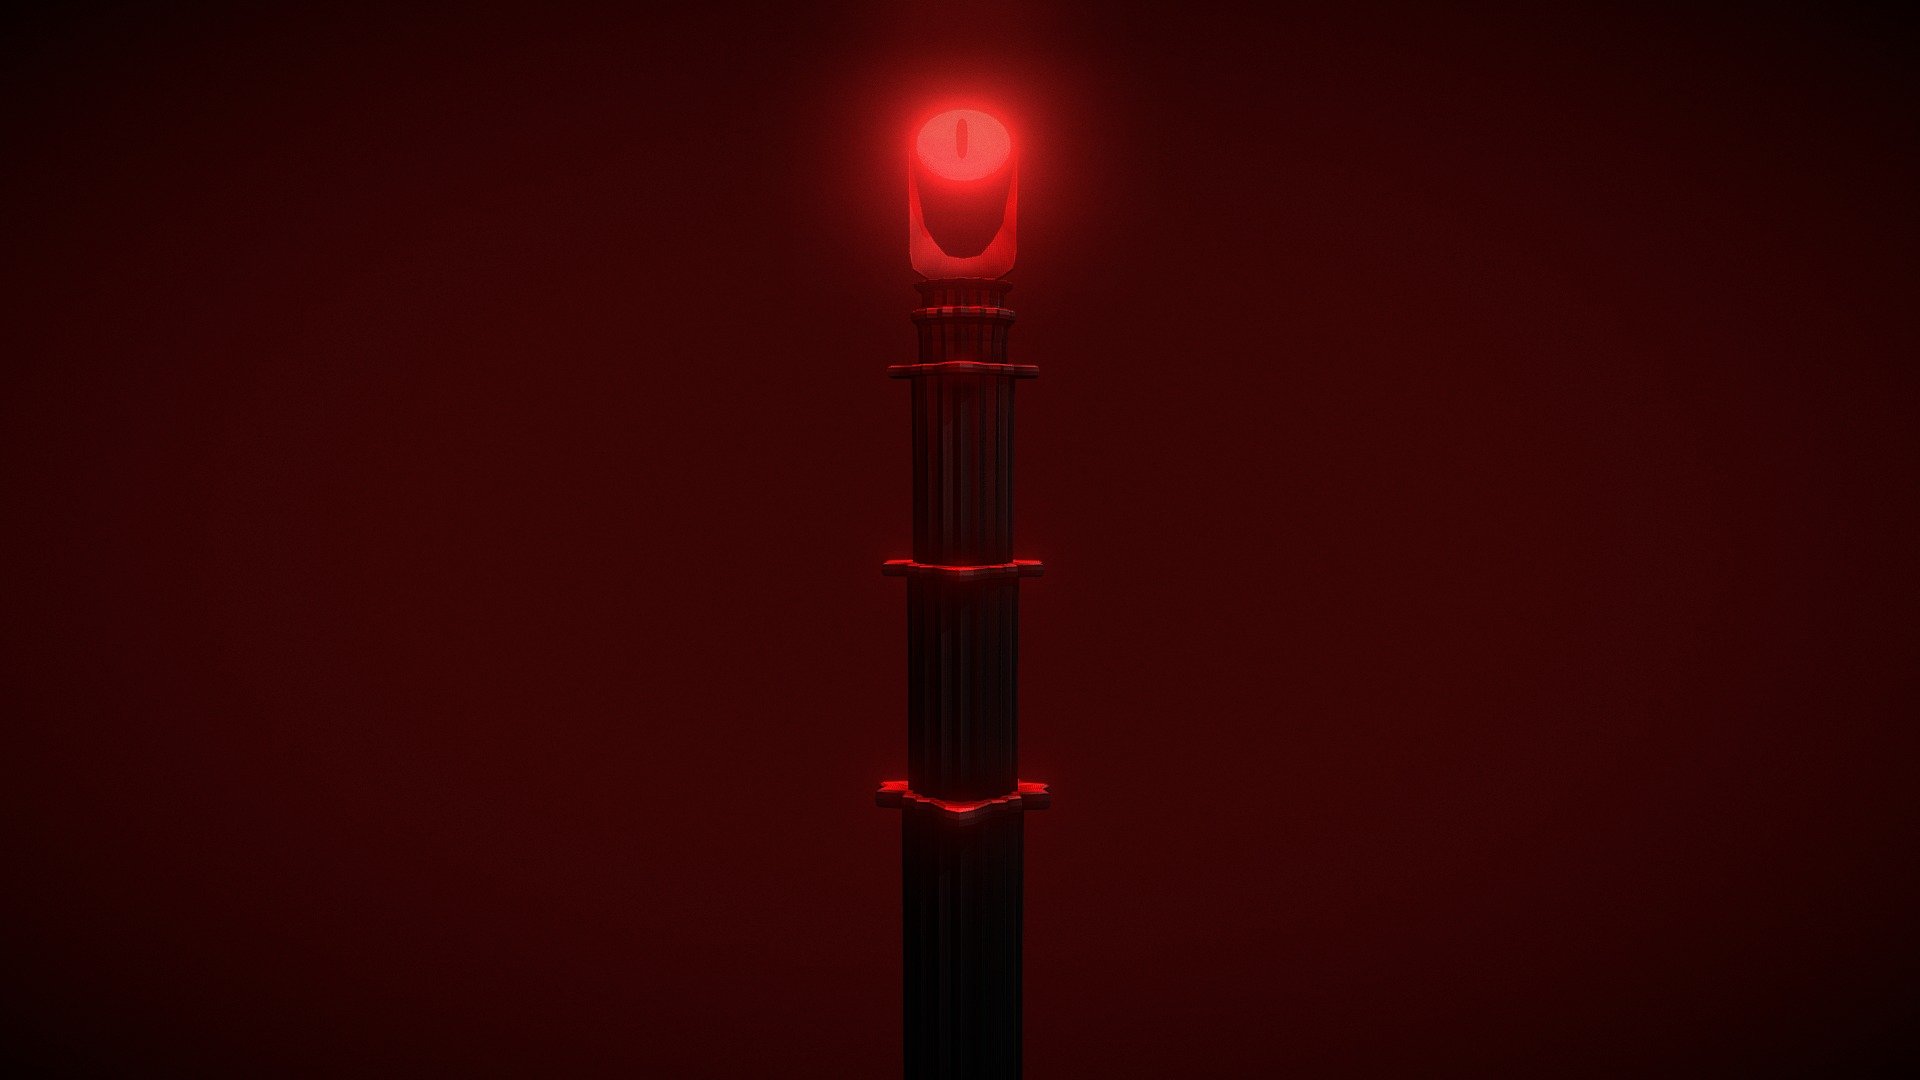 Barad-dûr, the “Dark Tower,” is a fictional place in J. R. R. Tolkien's Middle-earth writings and is described in The Lord of the Rings, The Silmarillion, and other works. It is an enormous fortress of the Dark Lord Sauron, whence he rules the volcanic and barren land of Mordor. Located in northwest Mordor, near Mount Doom, the Eye of Sauron keeps watch over Middle-earth from its highest tower. The name is pronounced &ldquo;Ba'rad doorr